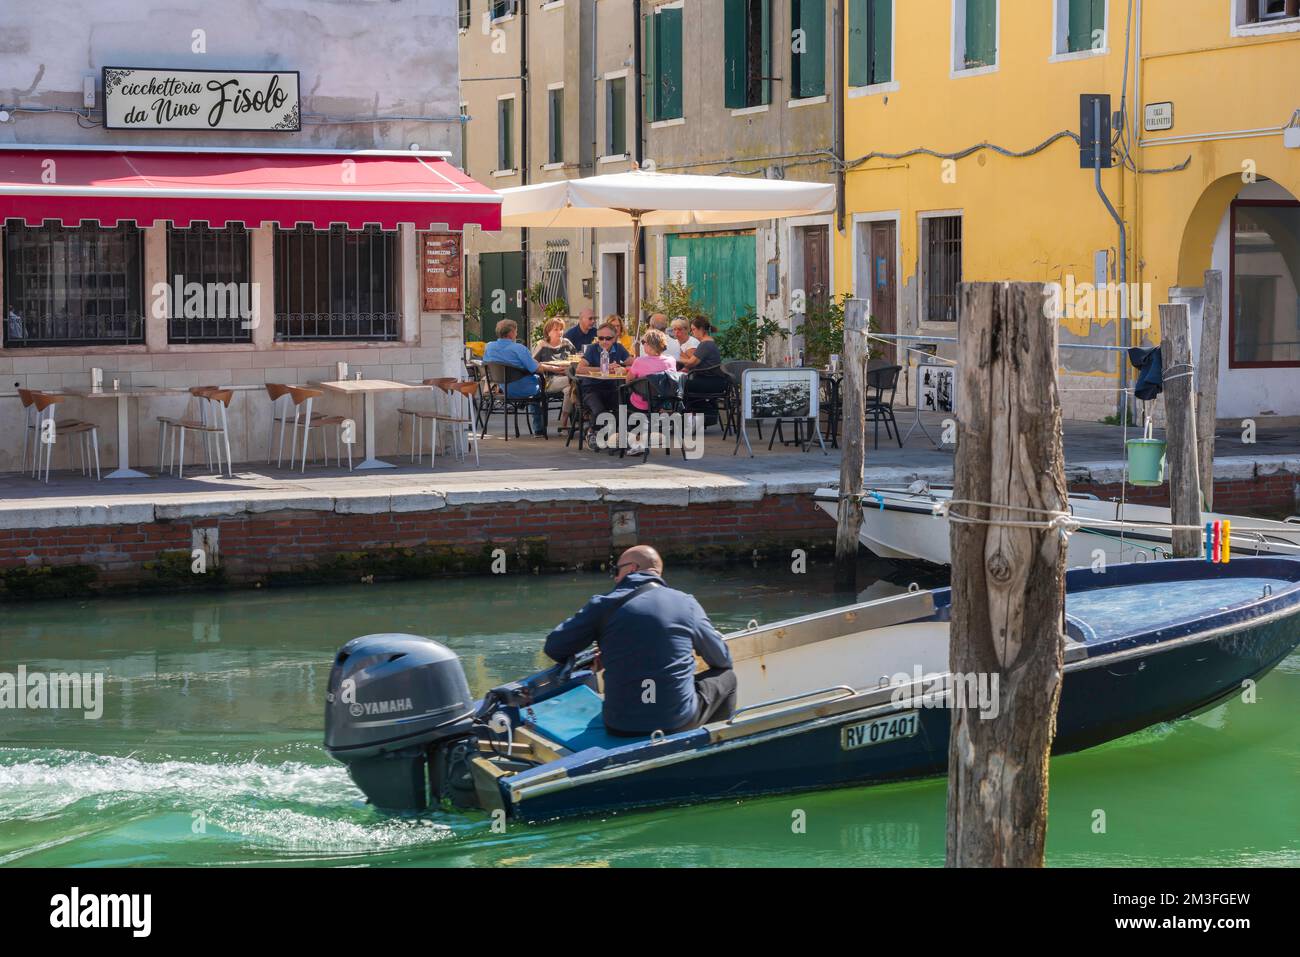 Italy canal restaurant, view in summer of a group of people dining at a restaurant terrace beside the Canal Vena in Chioggia, Comune of Venice, Italy Stock Photo